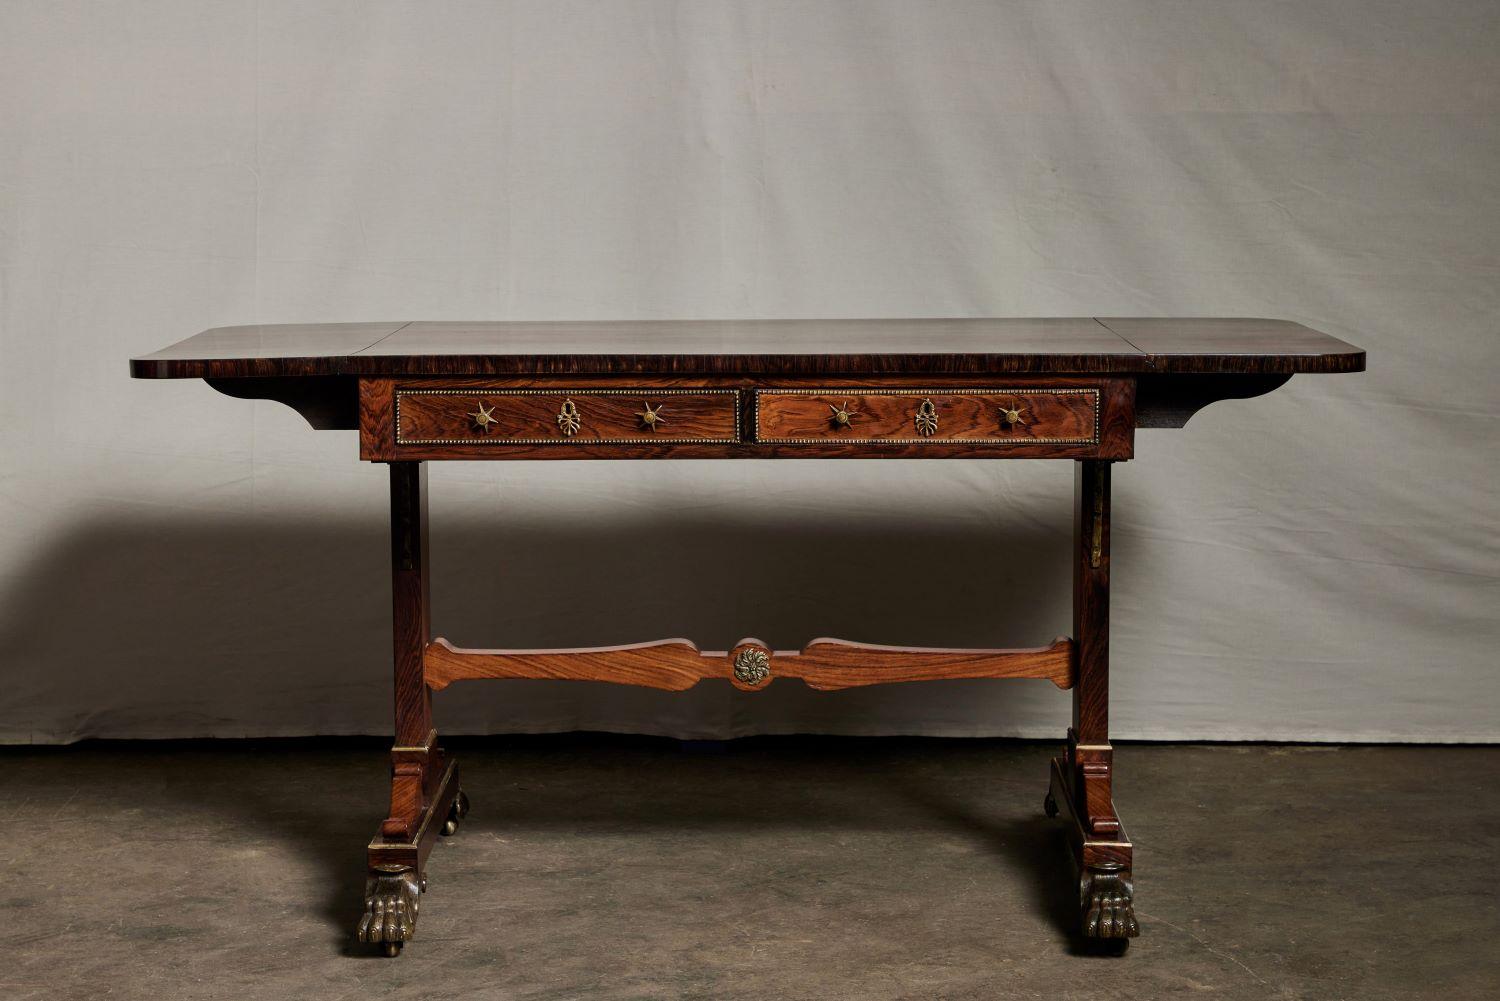 English Regency rosewood writing desk with 2 drawers. The desk's width is 38